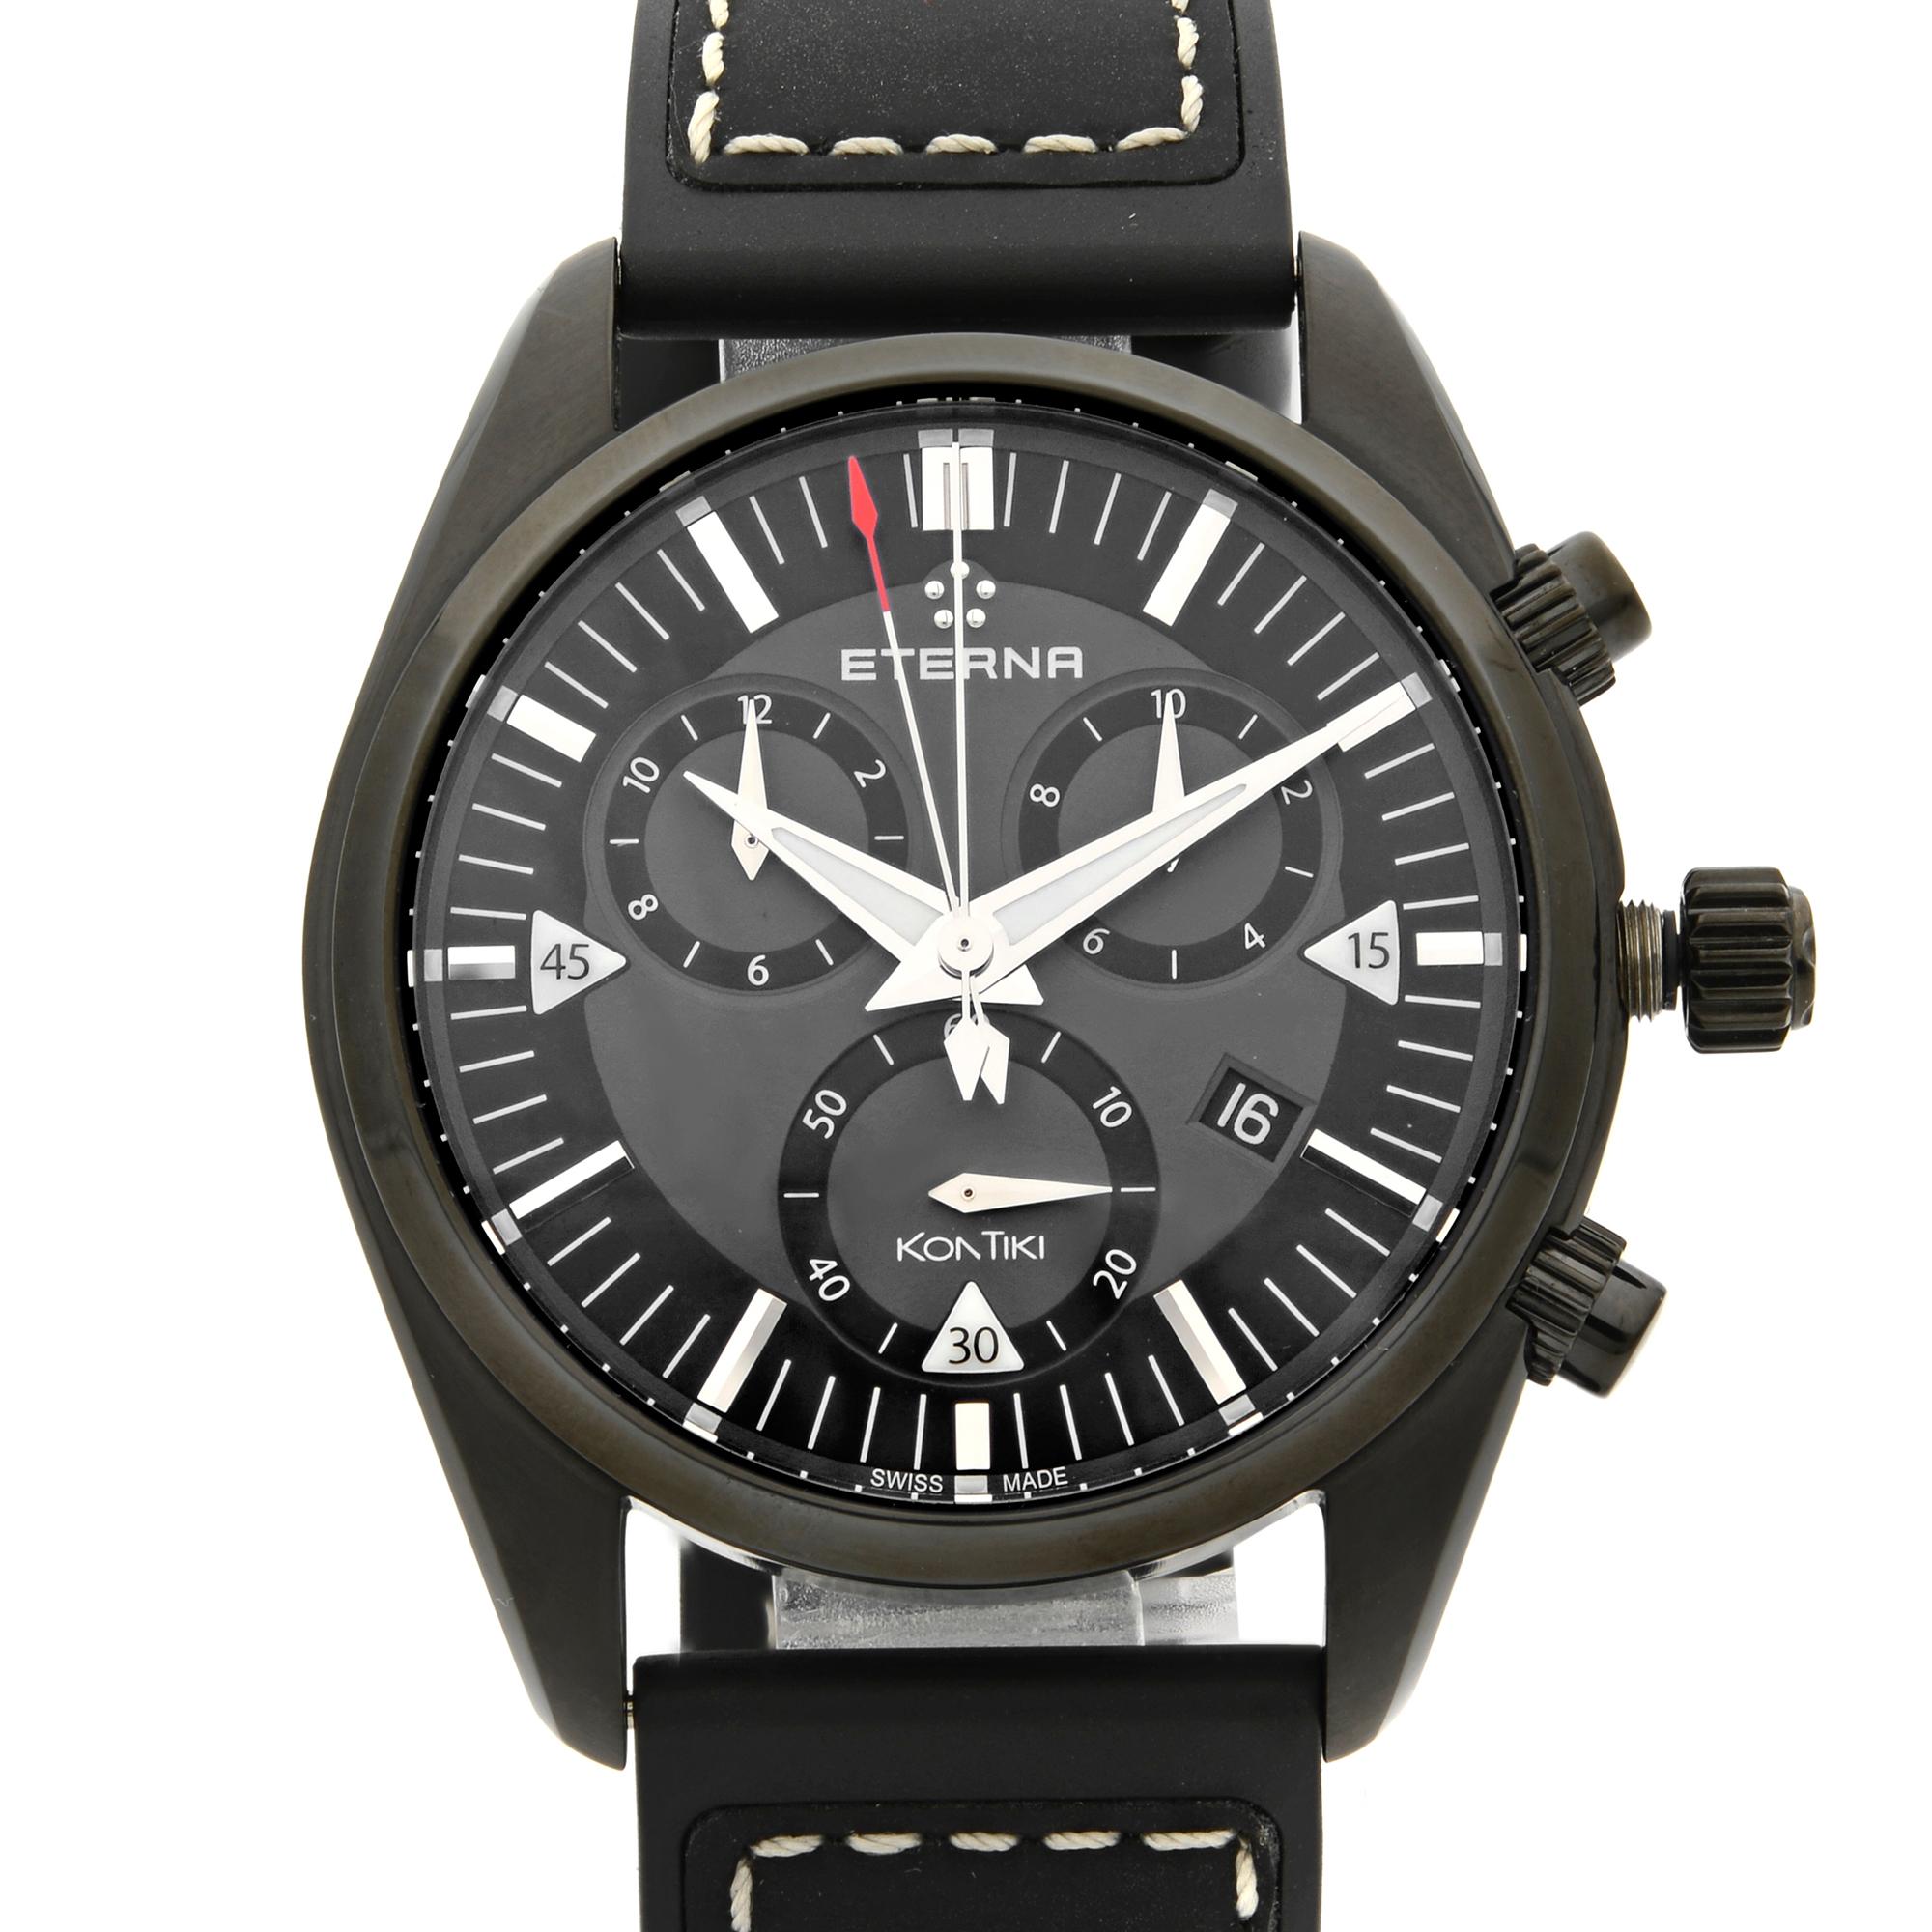 This display model Eterna Kontiki  1250.43.41.1308 is a beautiful men's timepiece that is powered by quartz (battery) movement which is cased in a stainless steel case. It has a round shape face, chronograph, date indicator, small seconds subdial